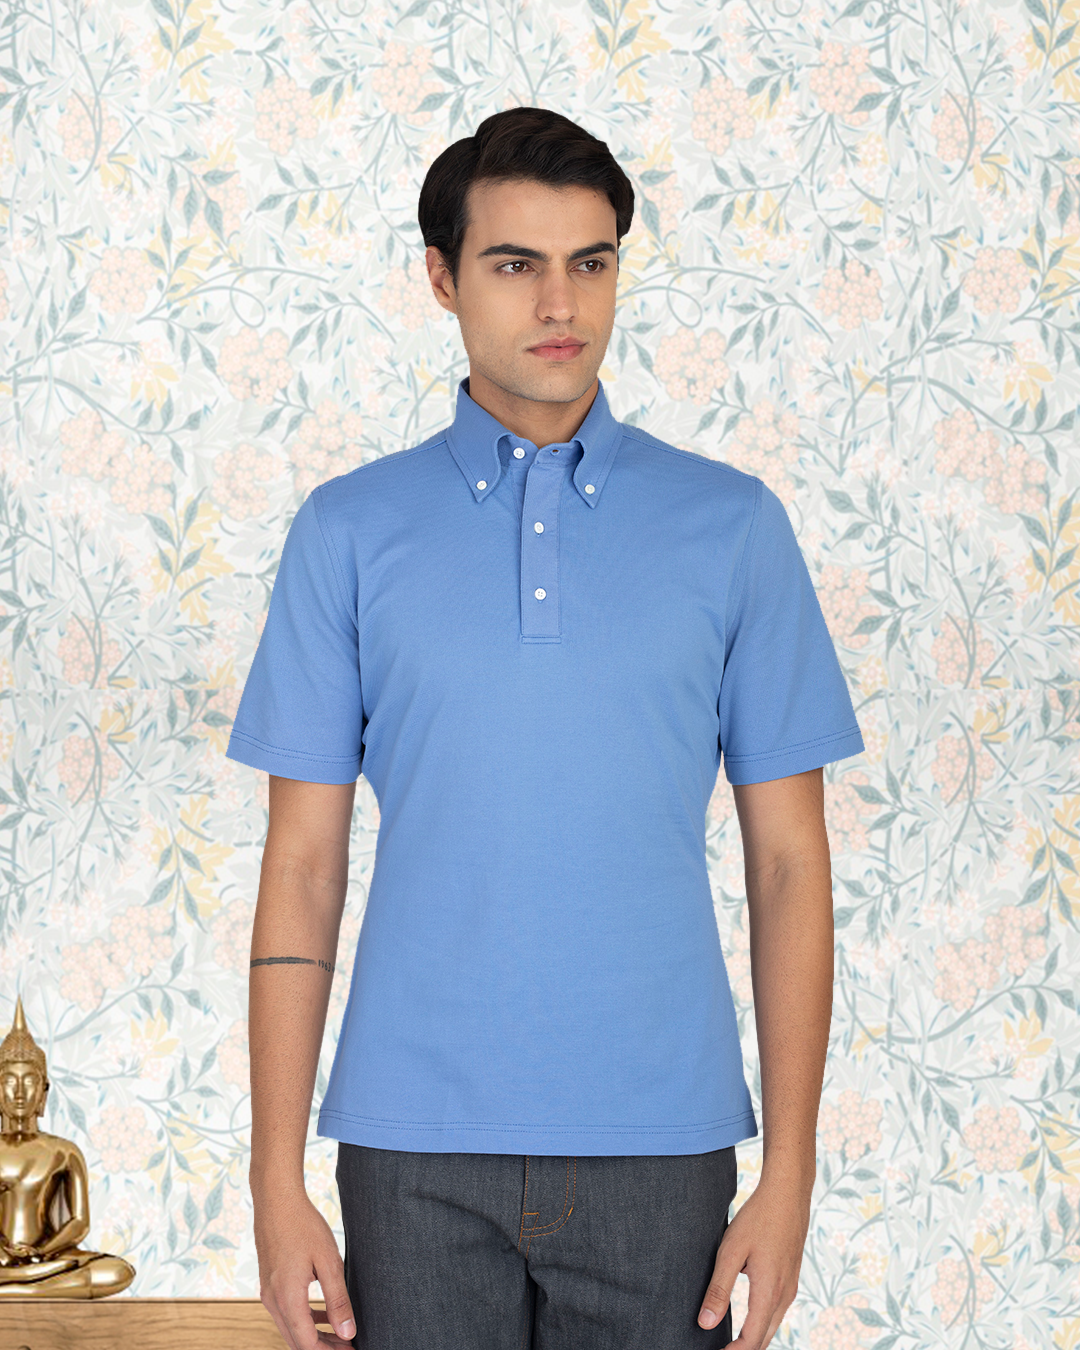 Close up view of model wearing the custom oxford polo shirt for men by Luxire in soft blue 3